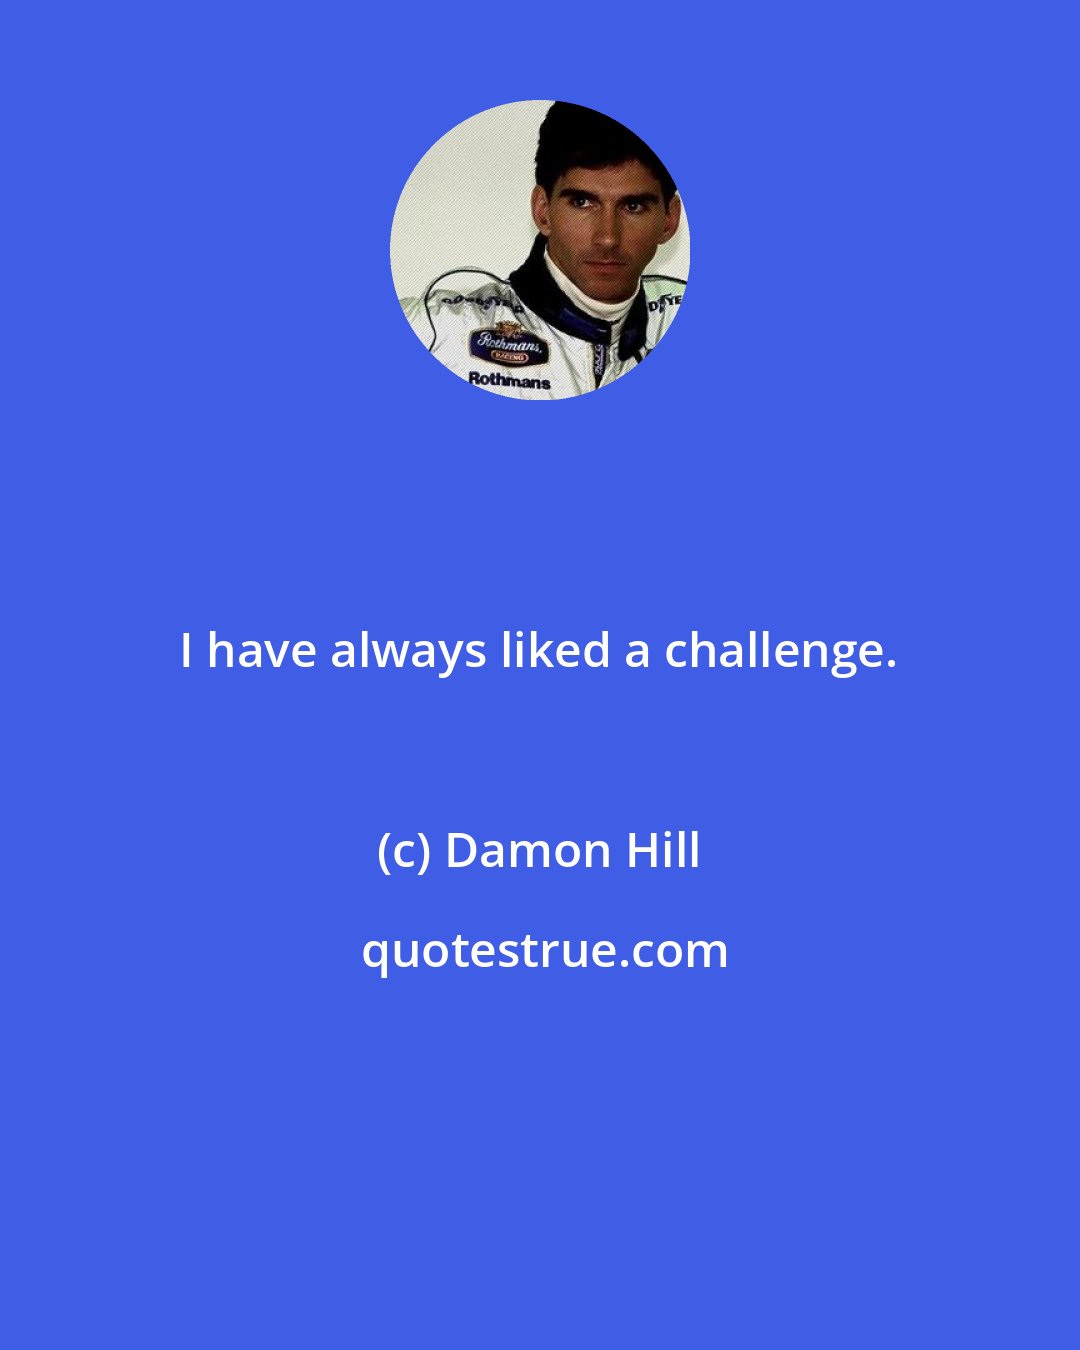 Damon Hill: I have always liked a challenge.